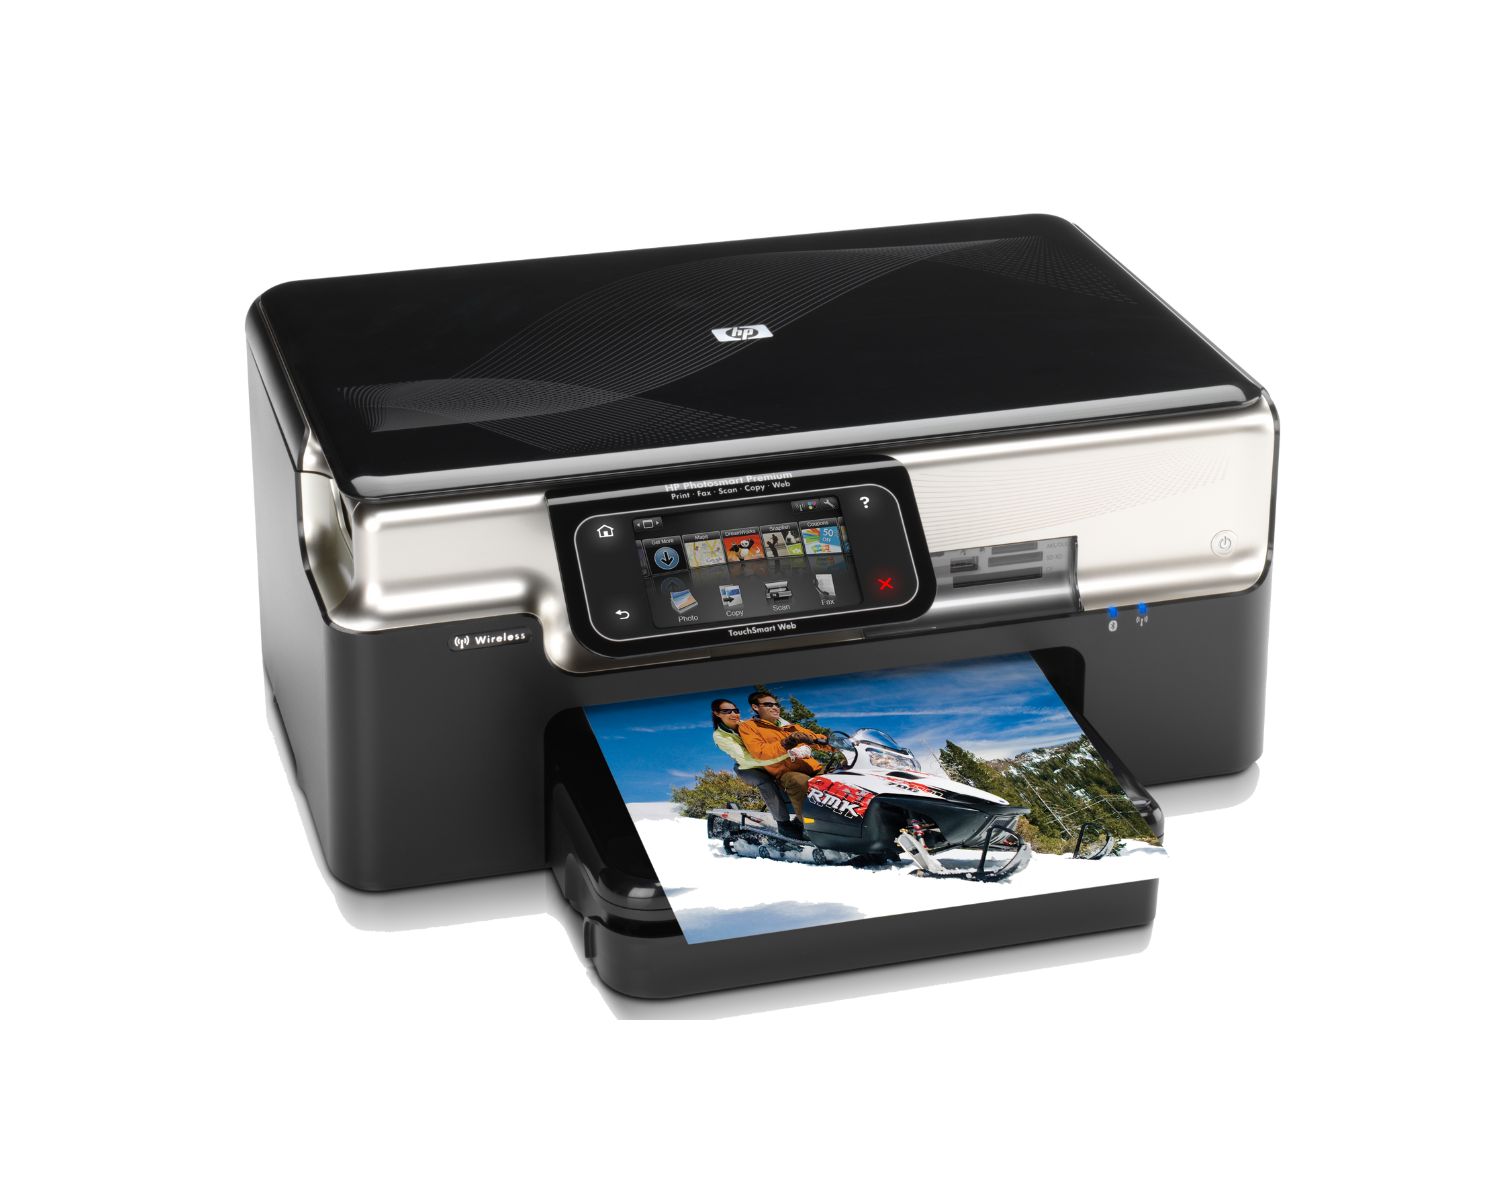 Which Type Of Printer Uses A Drum, Plastic Toner, And Fuser To Create A Printed Page